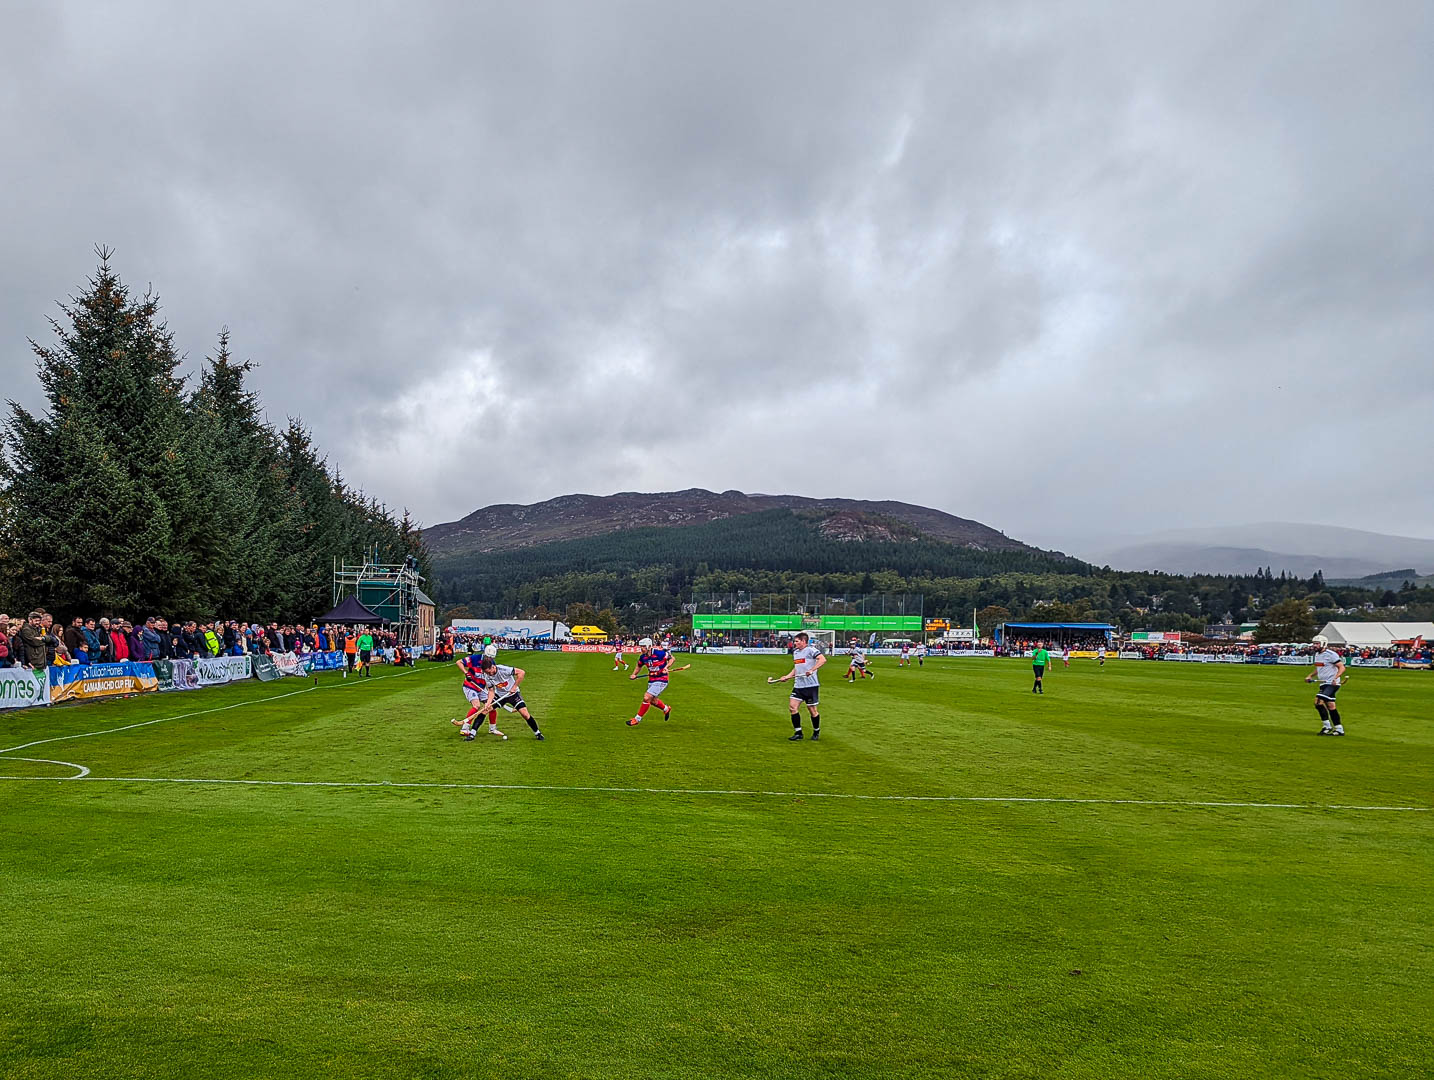 A Shinty game at The Dell in Kingussie